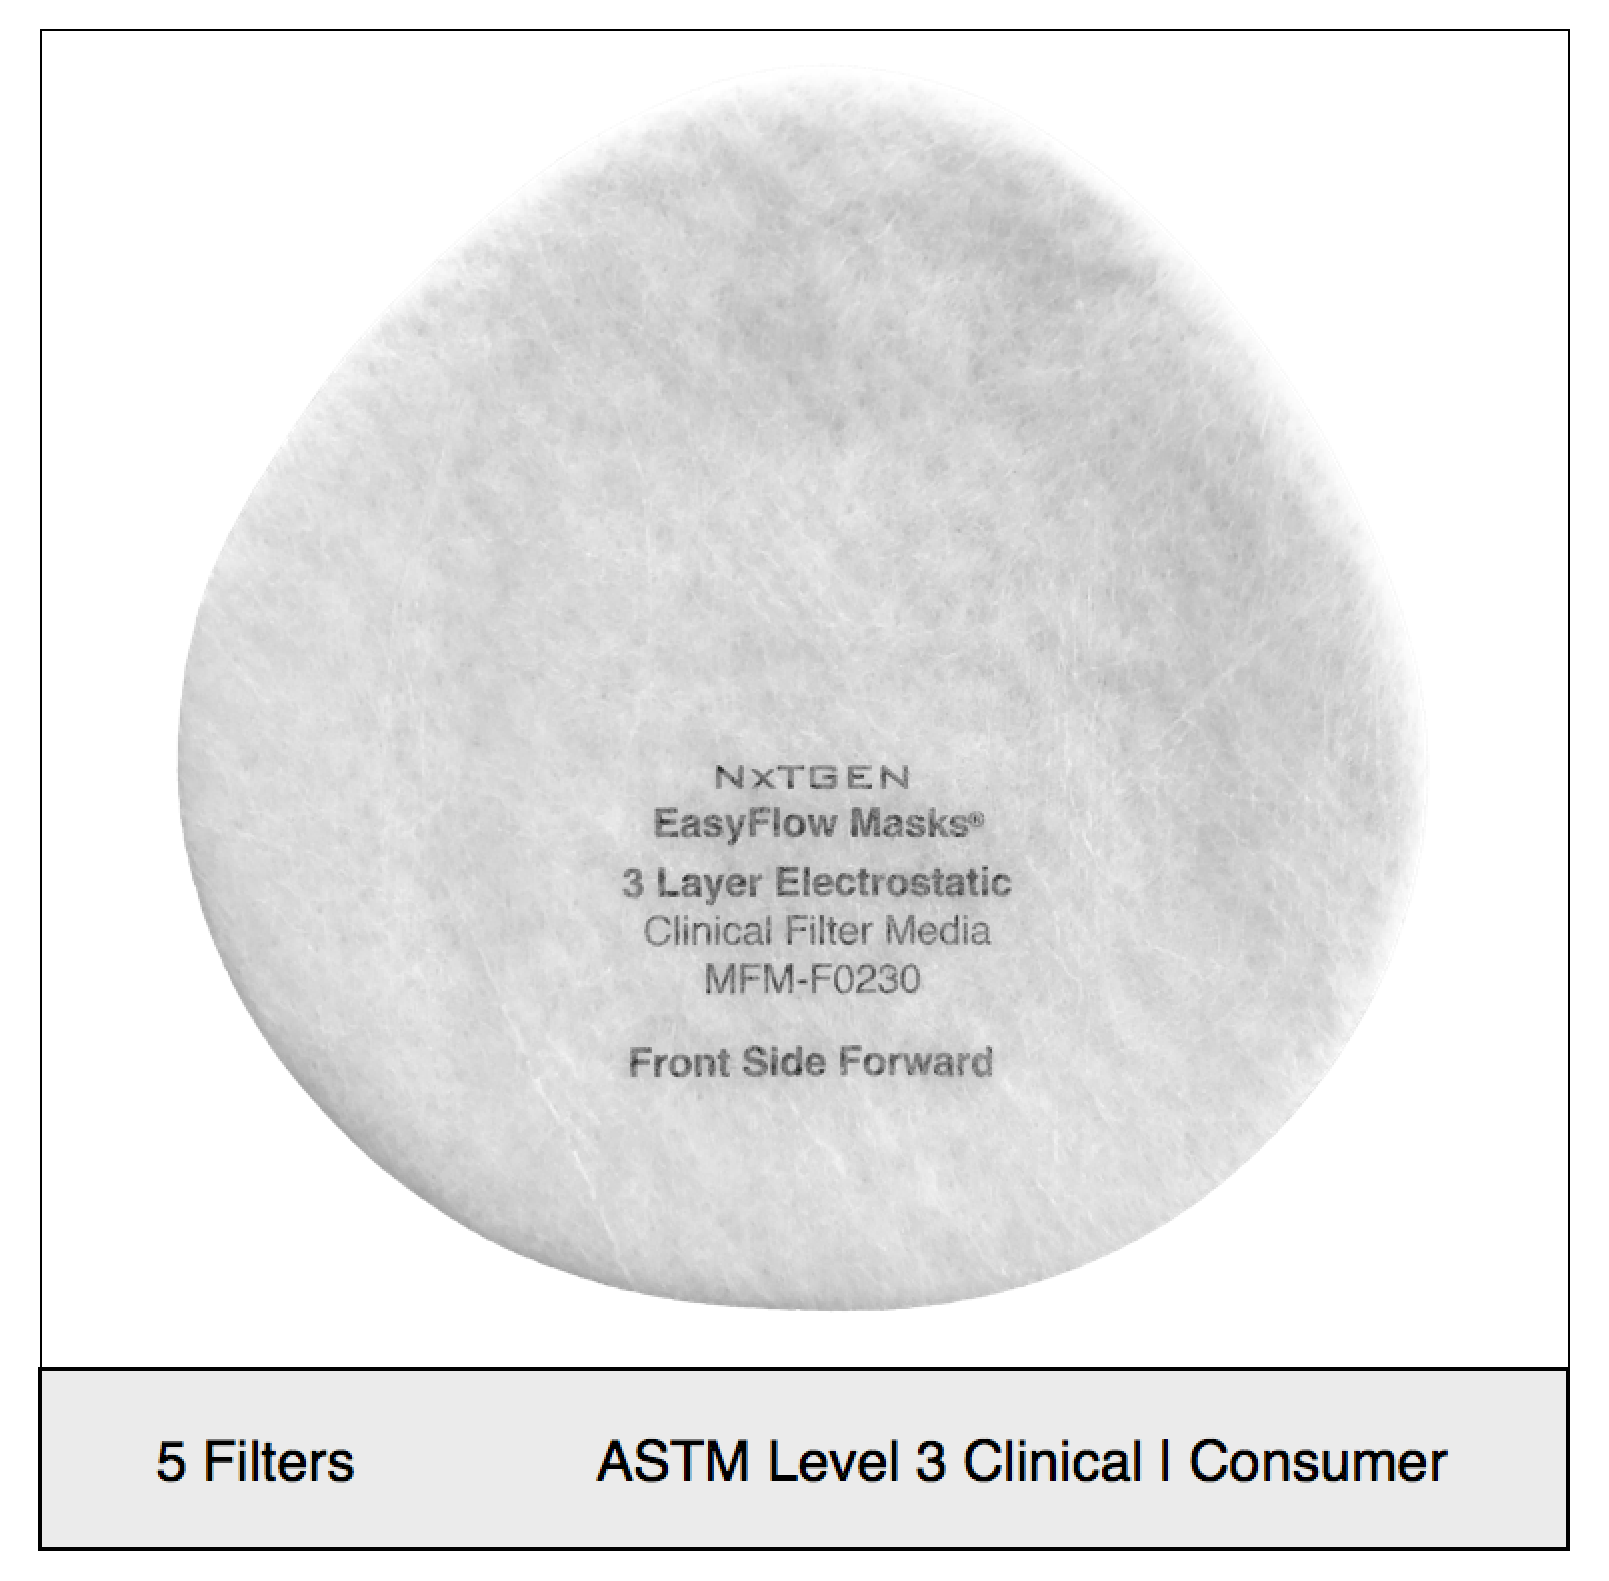 ASTM Level 3 Clinical | Consumer filter Set (5 qty)